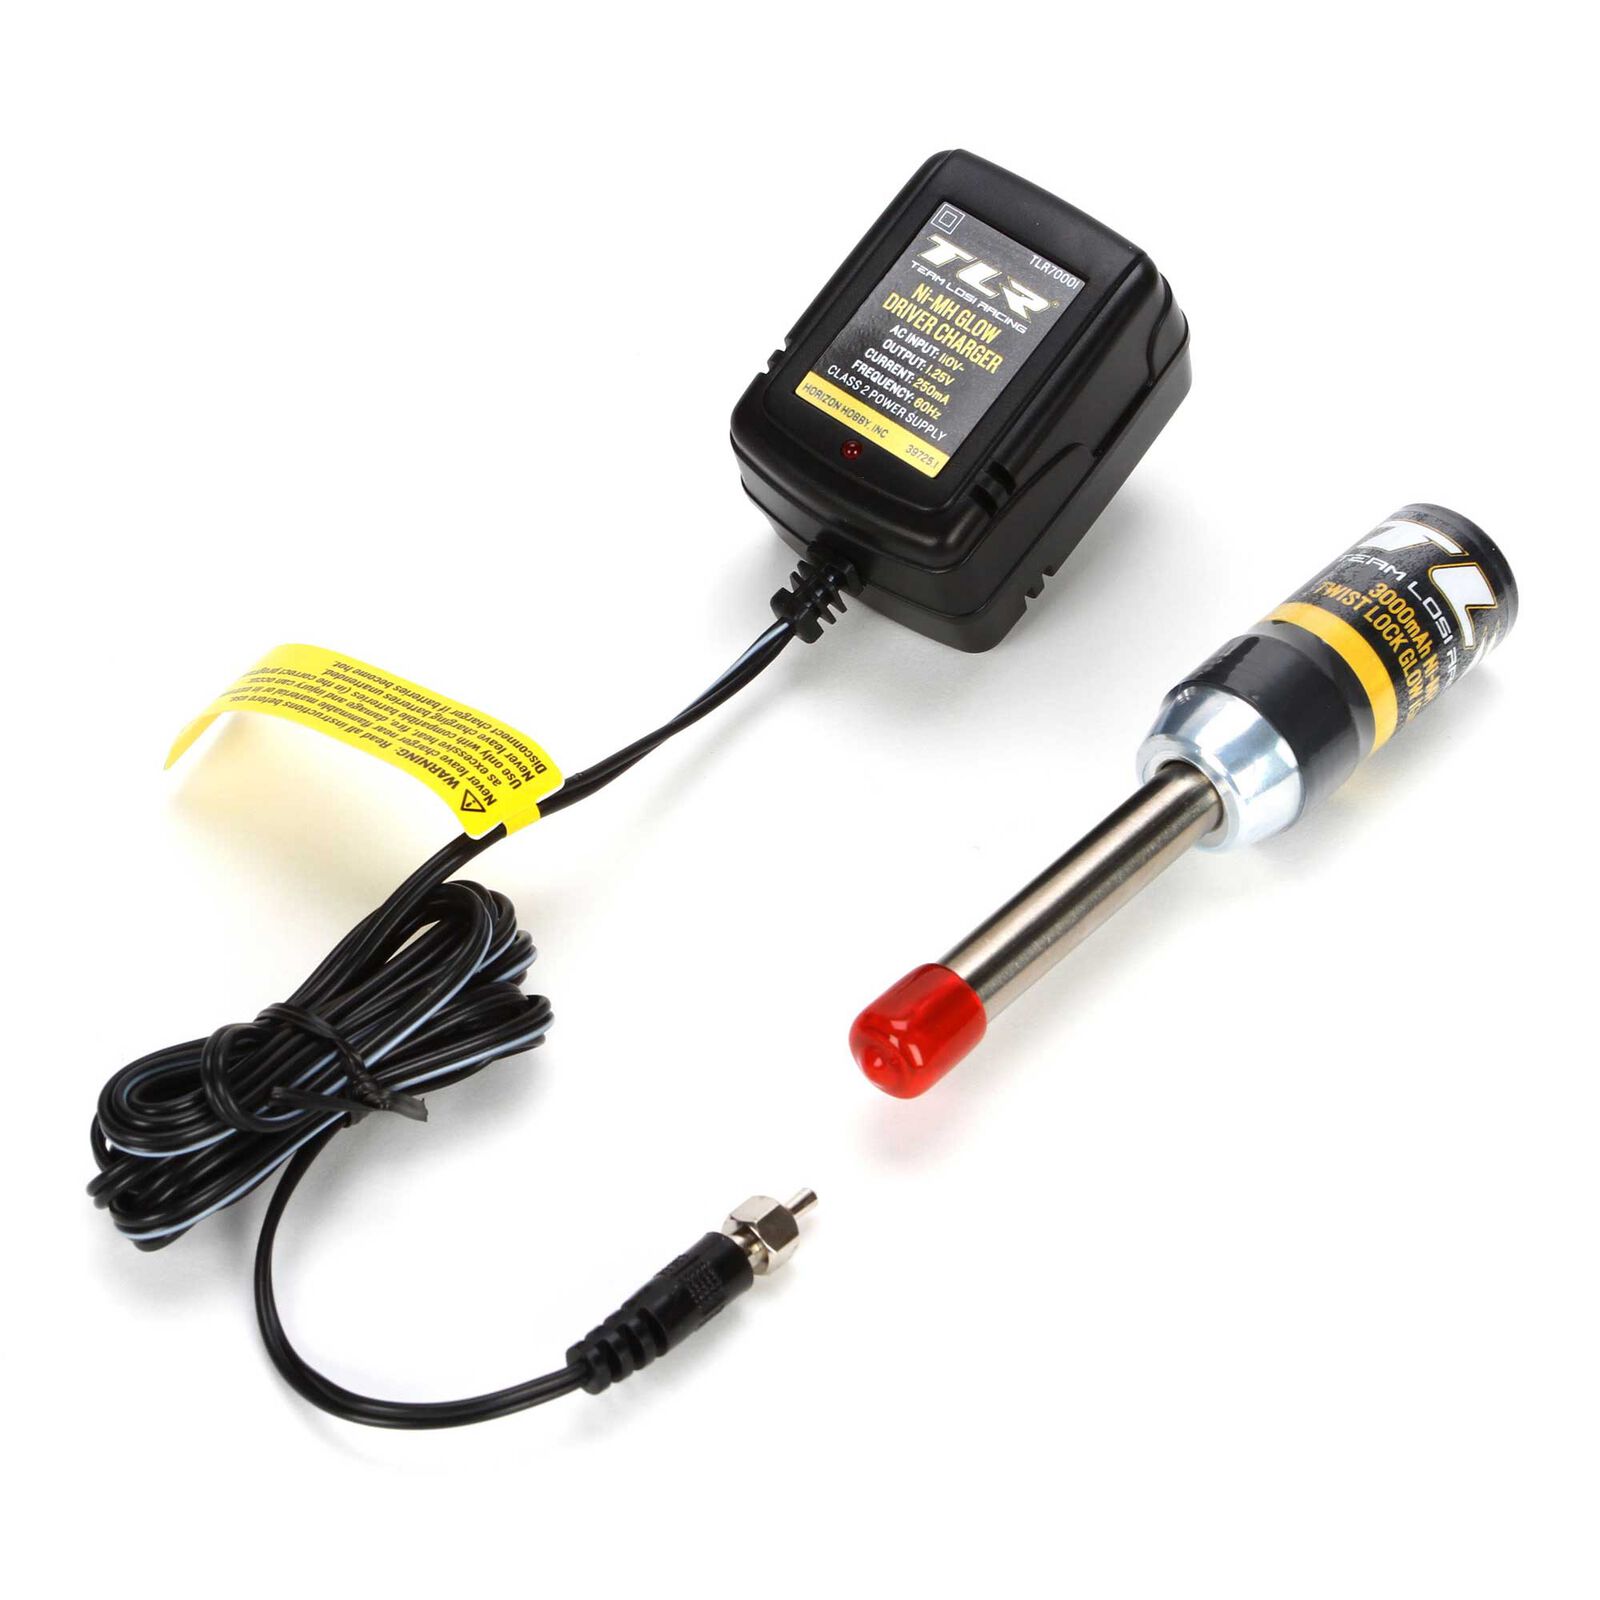 Twist Lock Glow Driver with Charger